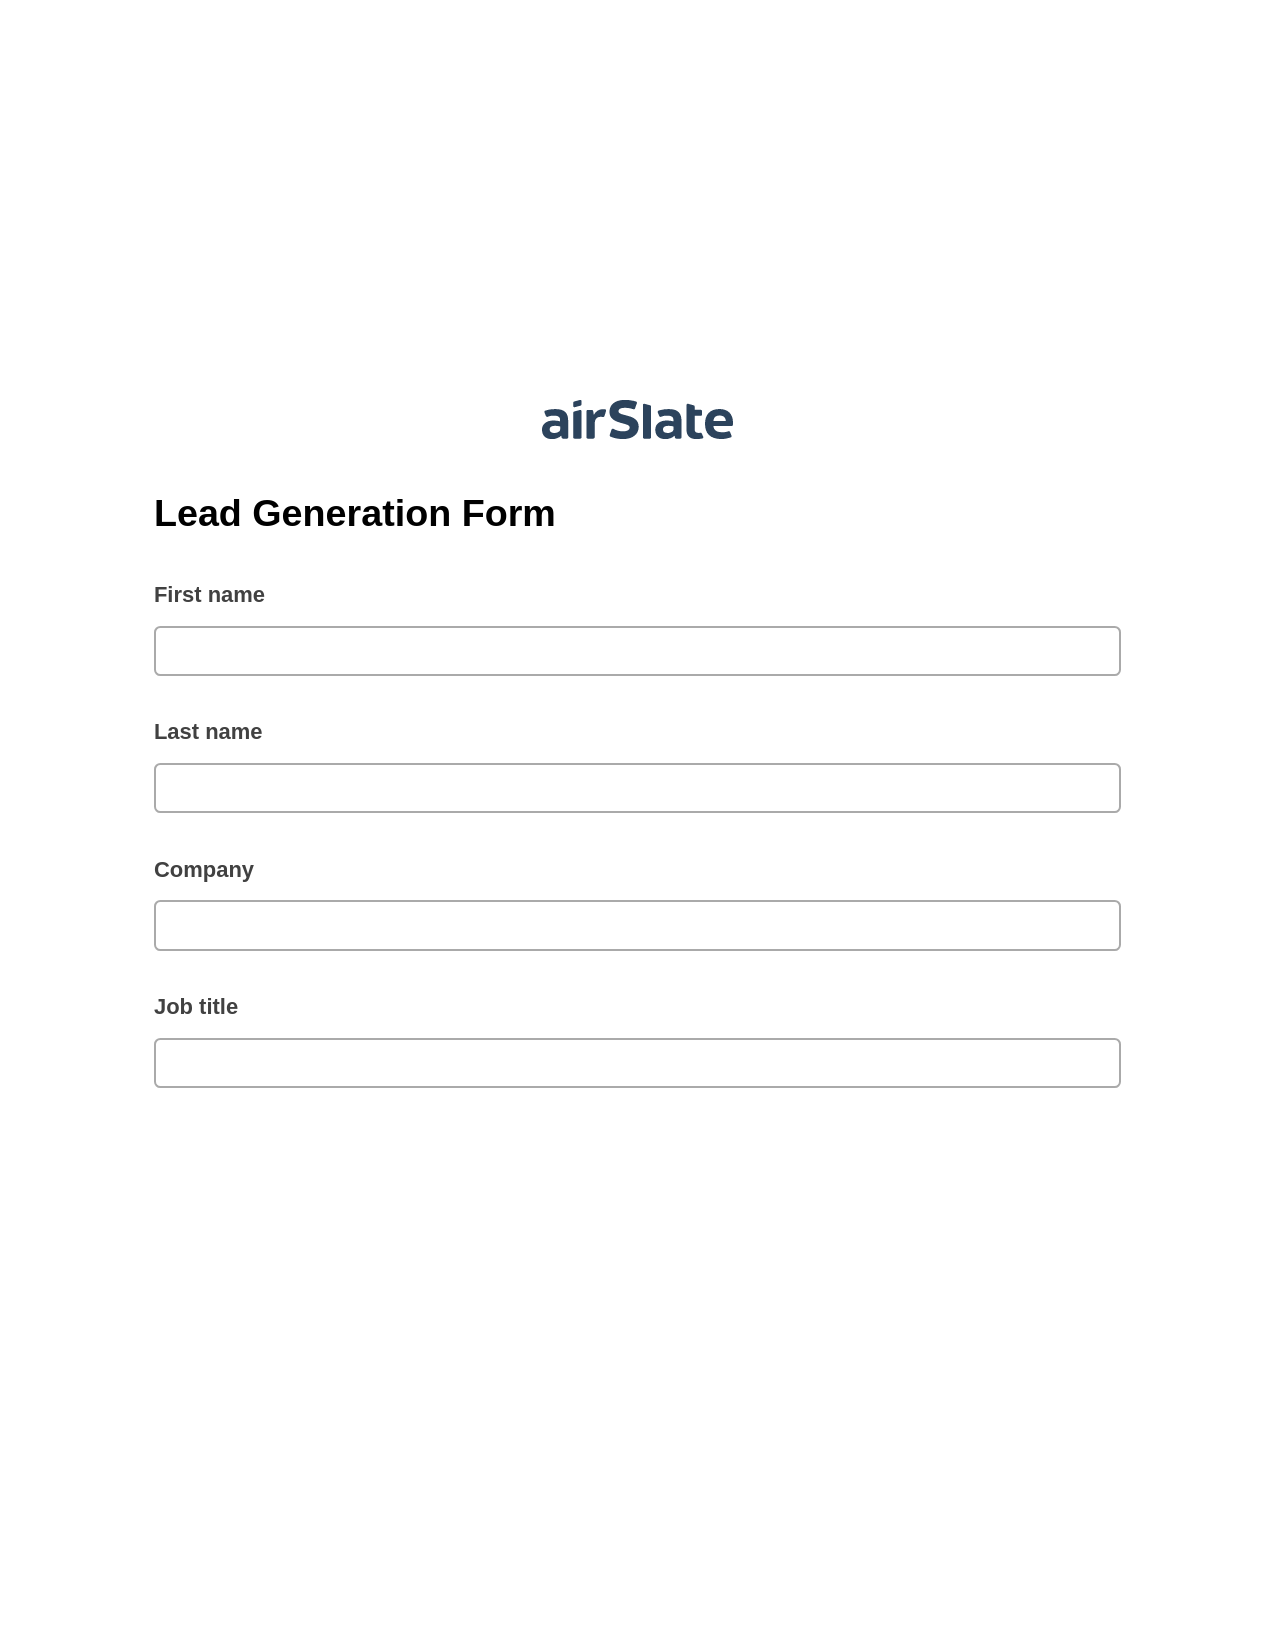 Lead Generation Form Pre-fill from another Slate Bot, Assign Roles to Recipients Bot, Archive to SharePoint Folder Bot